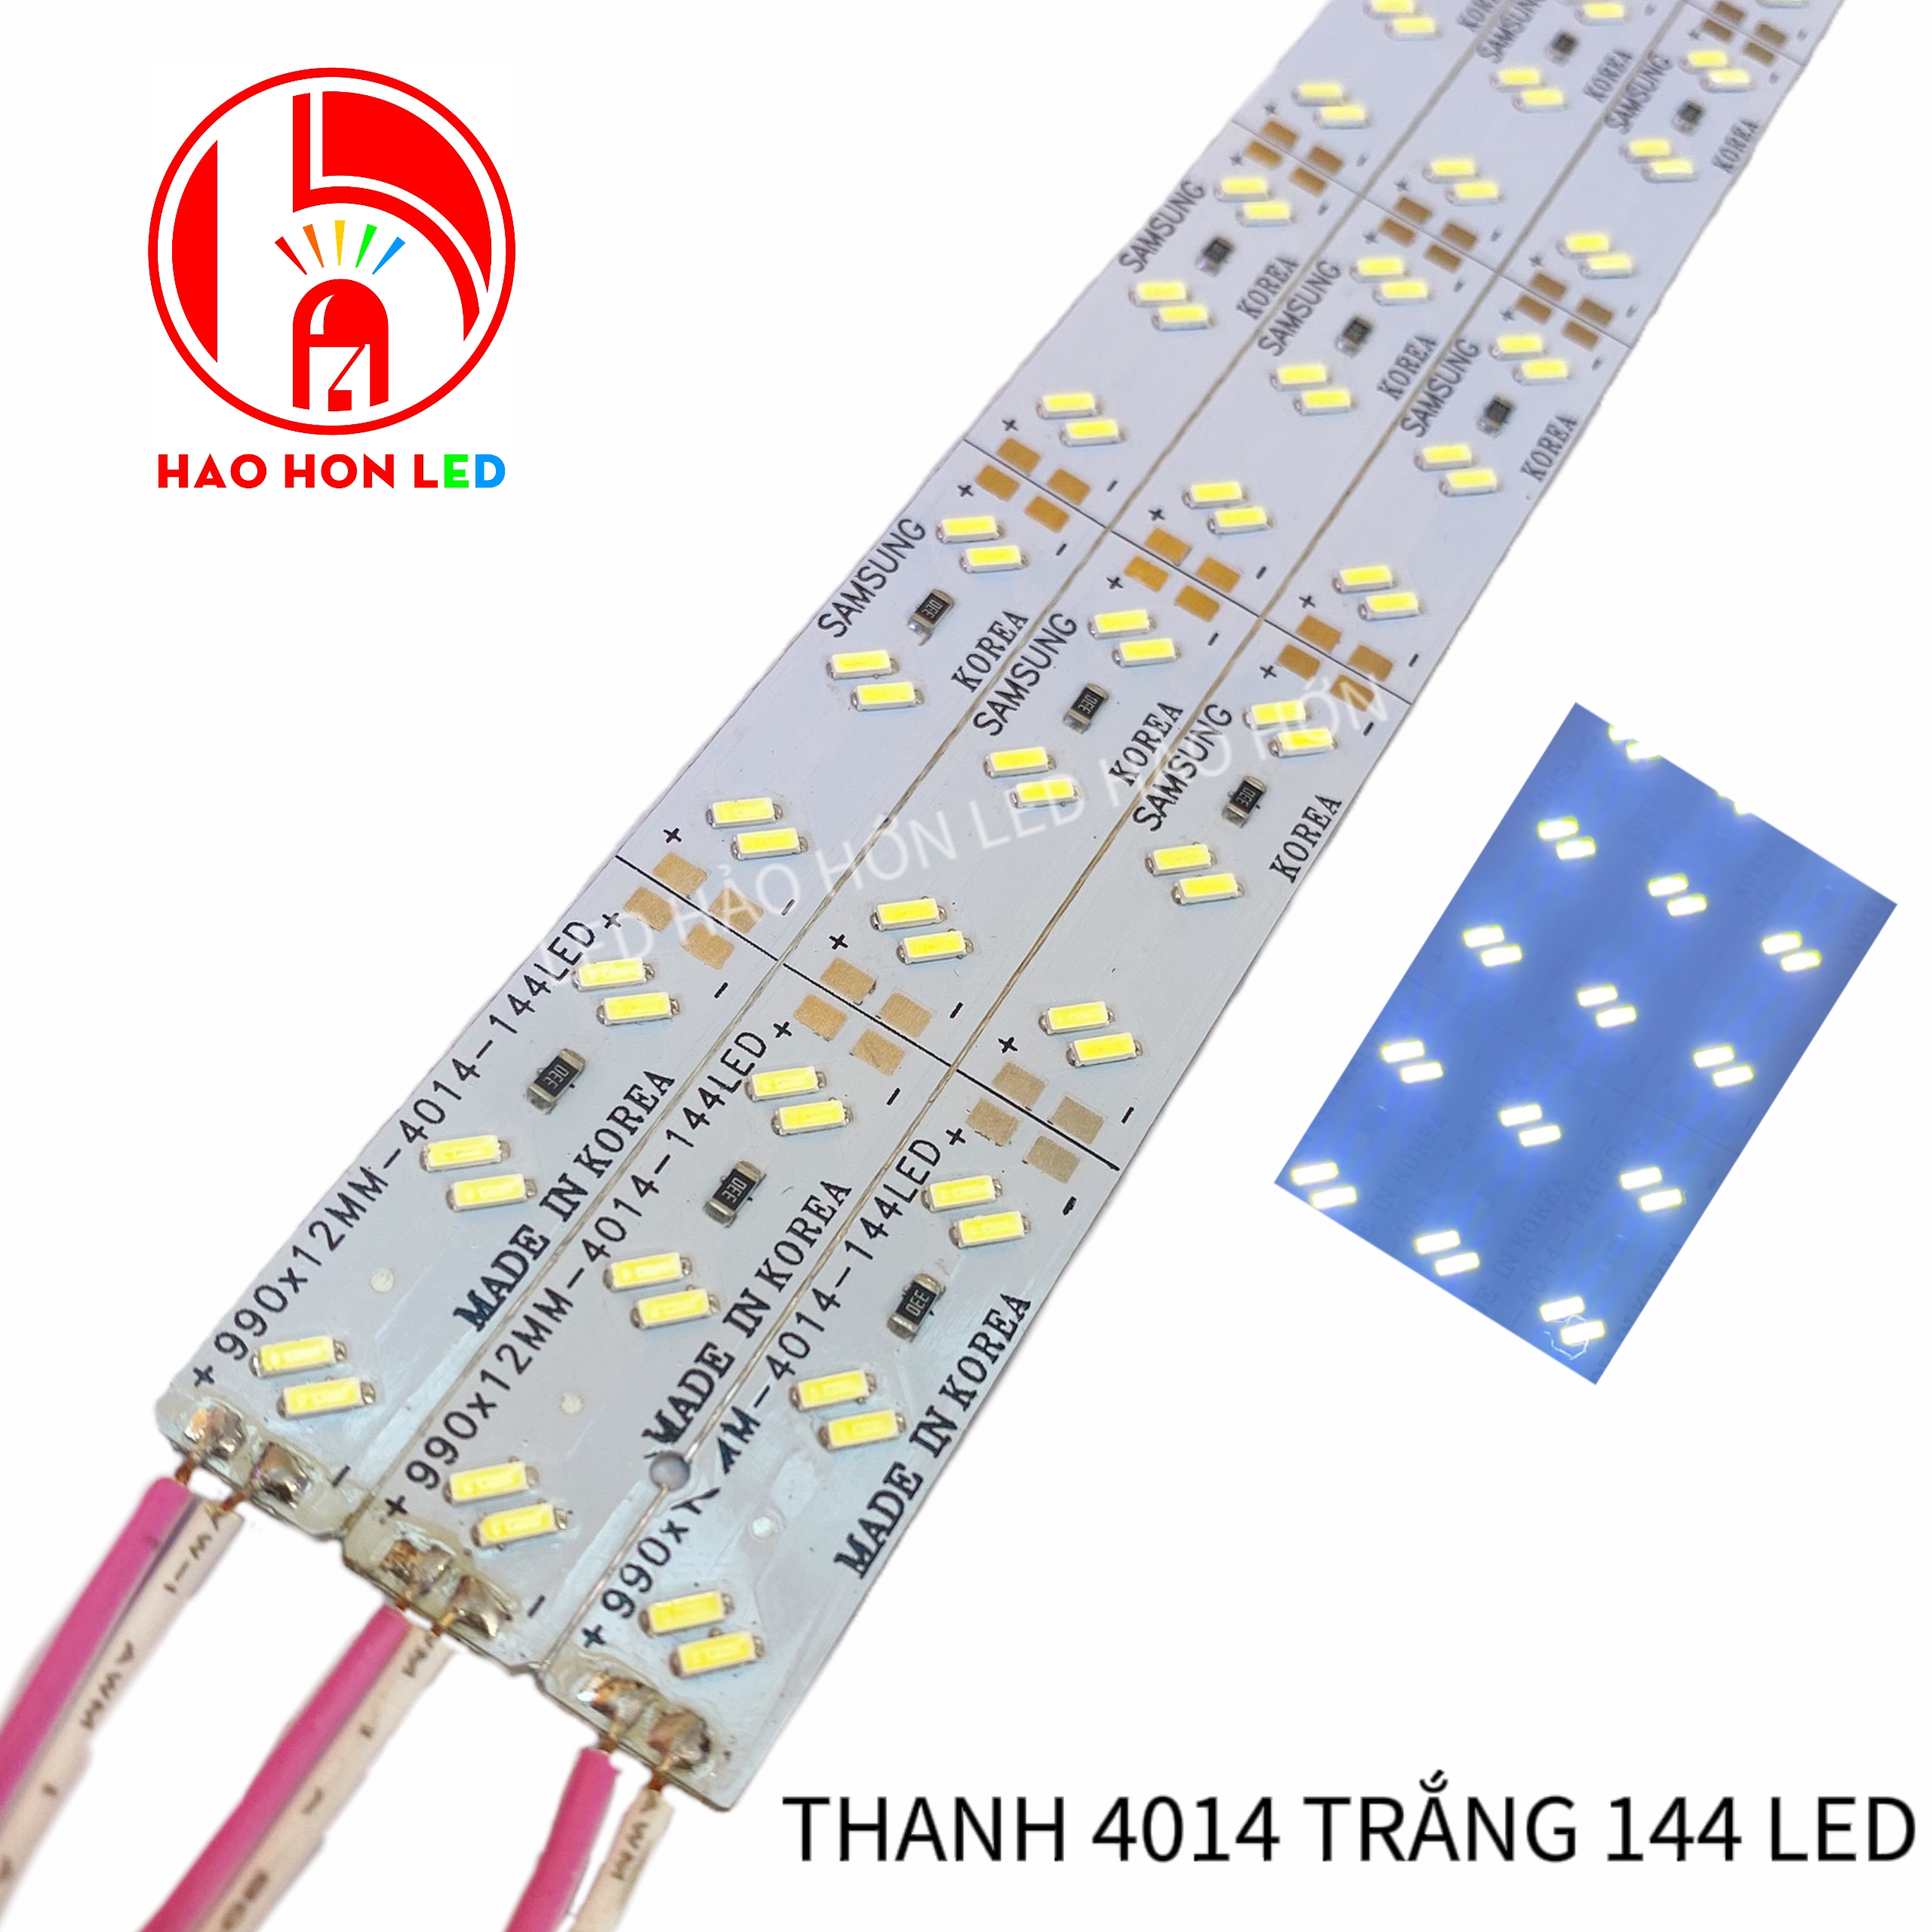 THANH 4014 TRẮNG 144LED